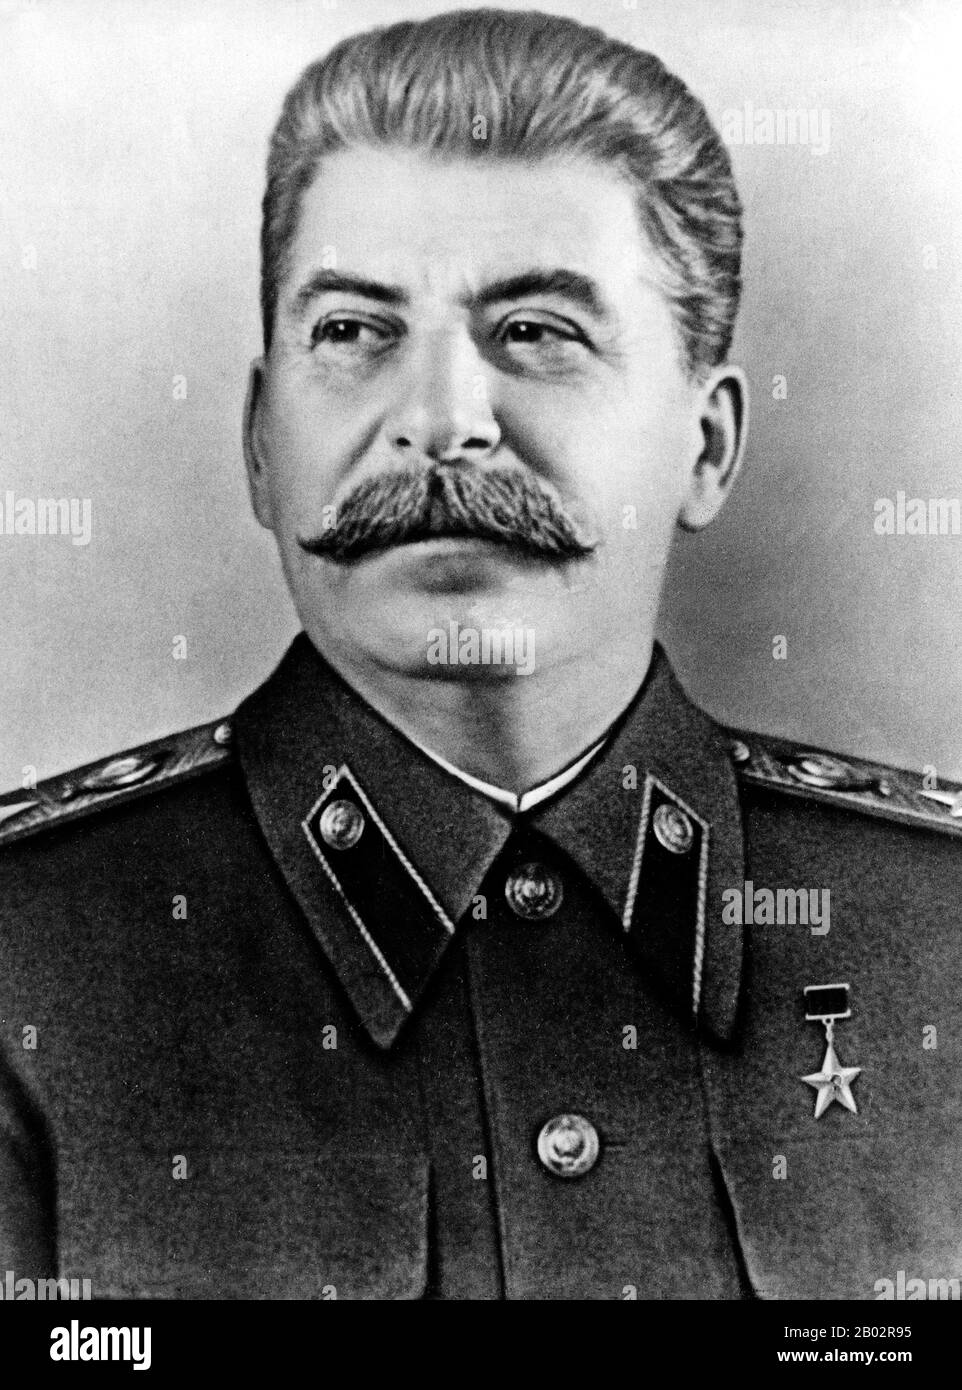 Joseph Vissarionovich Stalin (18 December 1878 – 5 March 1953) was the first General Secretary of the Communist Party of the Soviet Union's Central Committee from 1922 until his death in 1953. While formally the office of the General Secretary was elective and was not initially regarded as top position in the Soviet state, after Vladimir Lenin's death in 1924, Stalin managed to consolidate more and more power in his hands, gradually putting down all opposition groups within the party.  Stalin's idea of socialism in one country became the primary line of the Soviet politics. He dominated Soviet Stock Photo